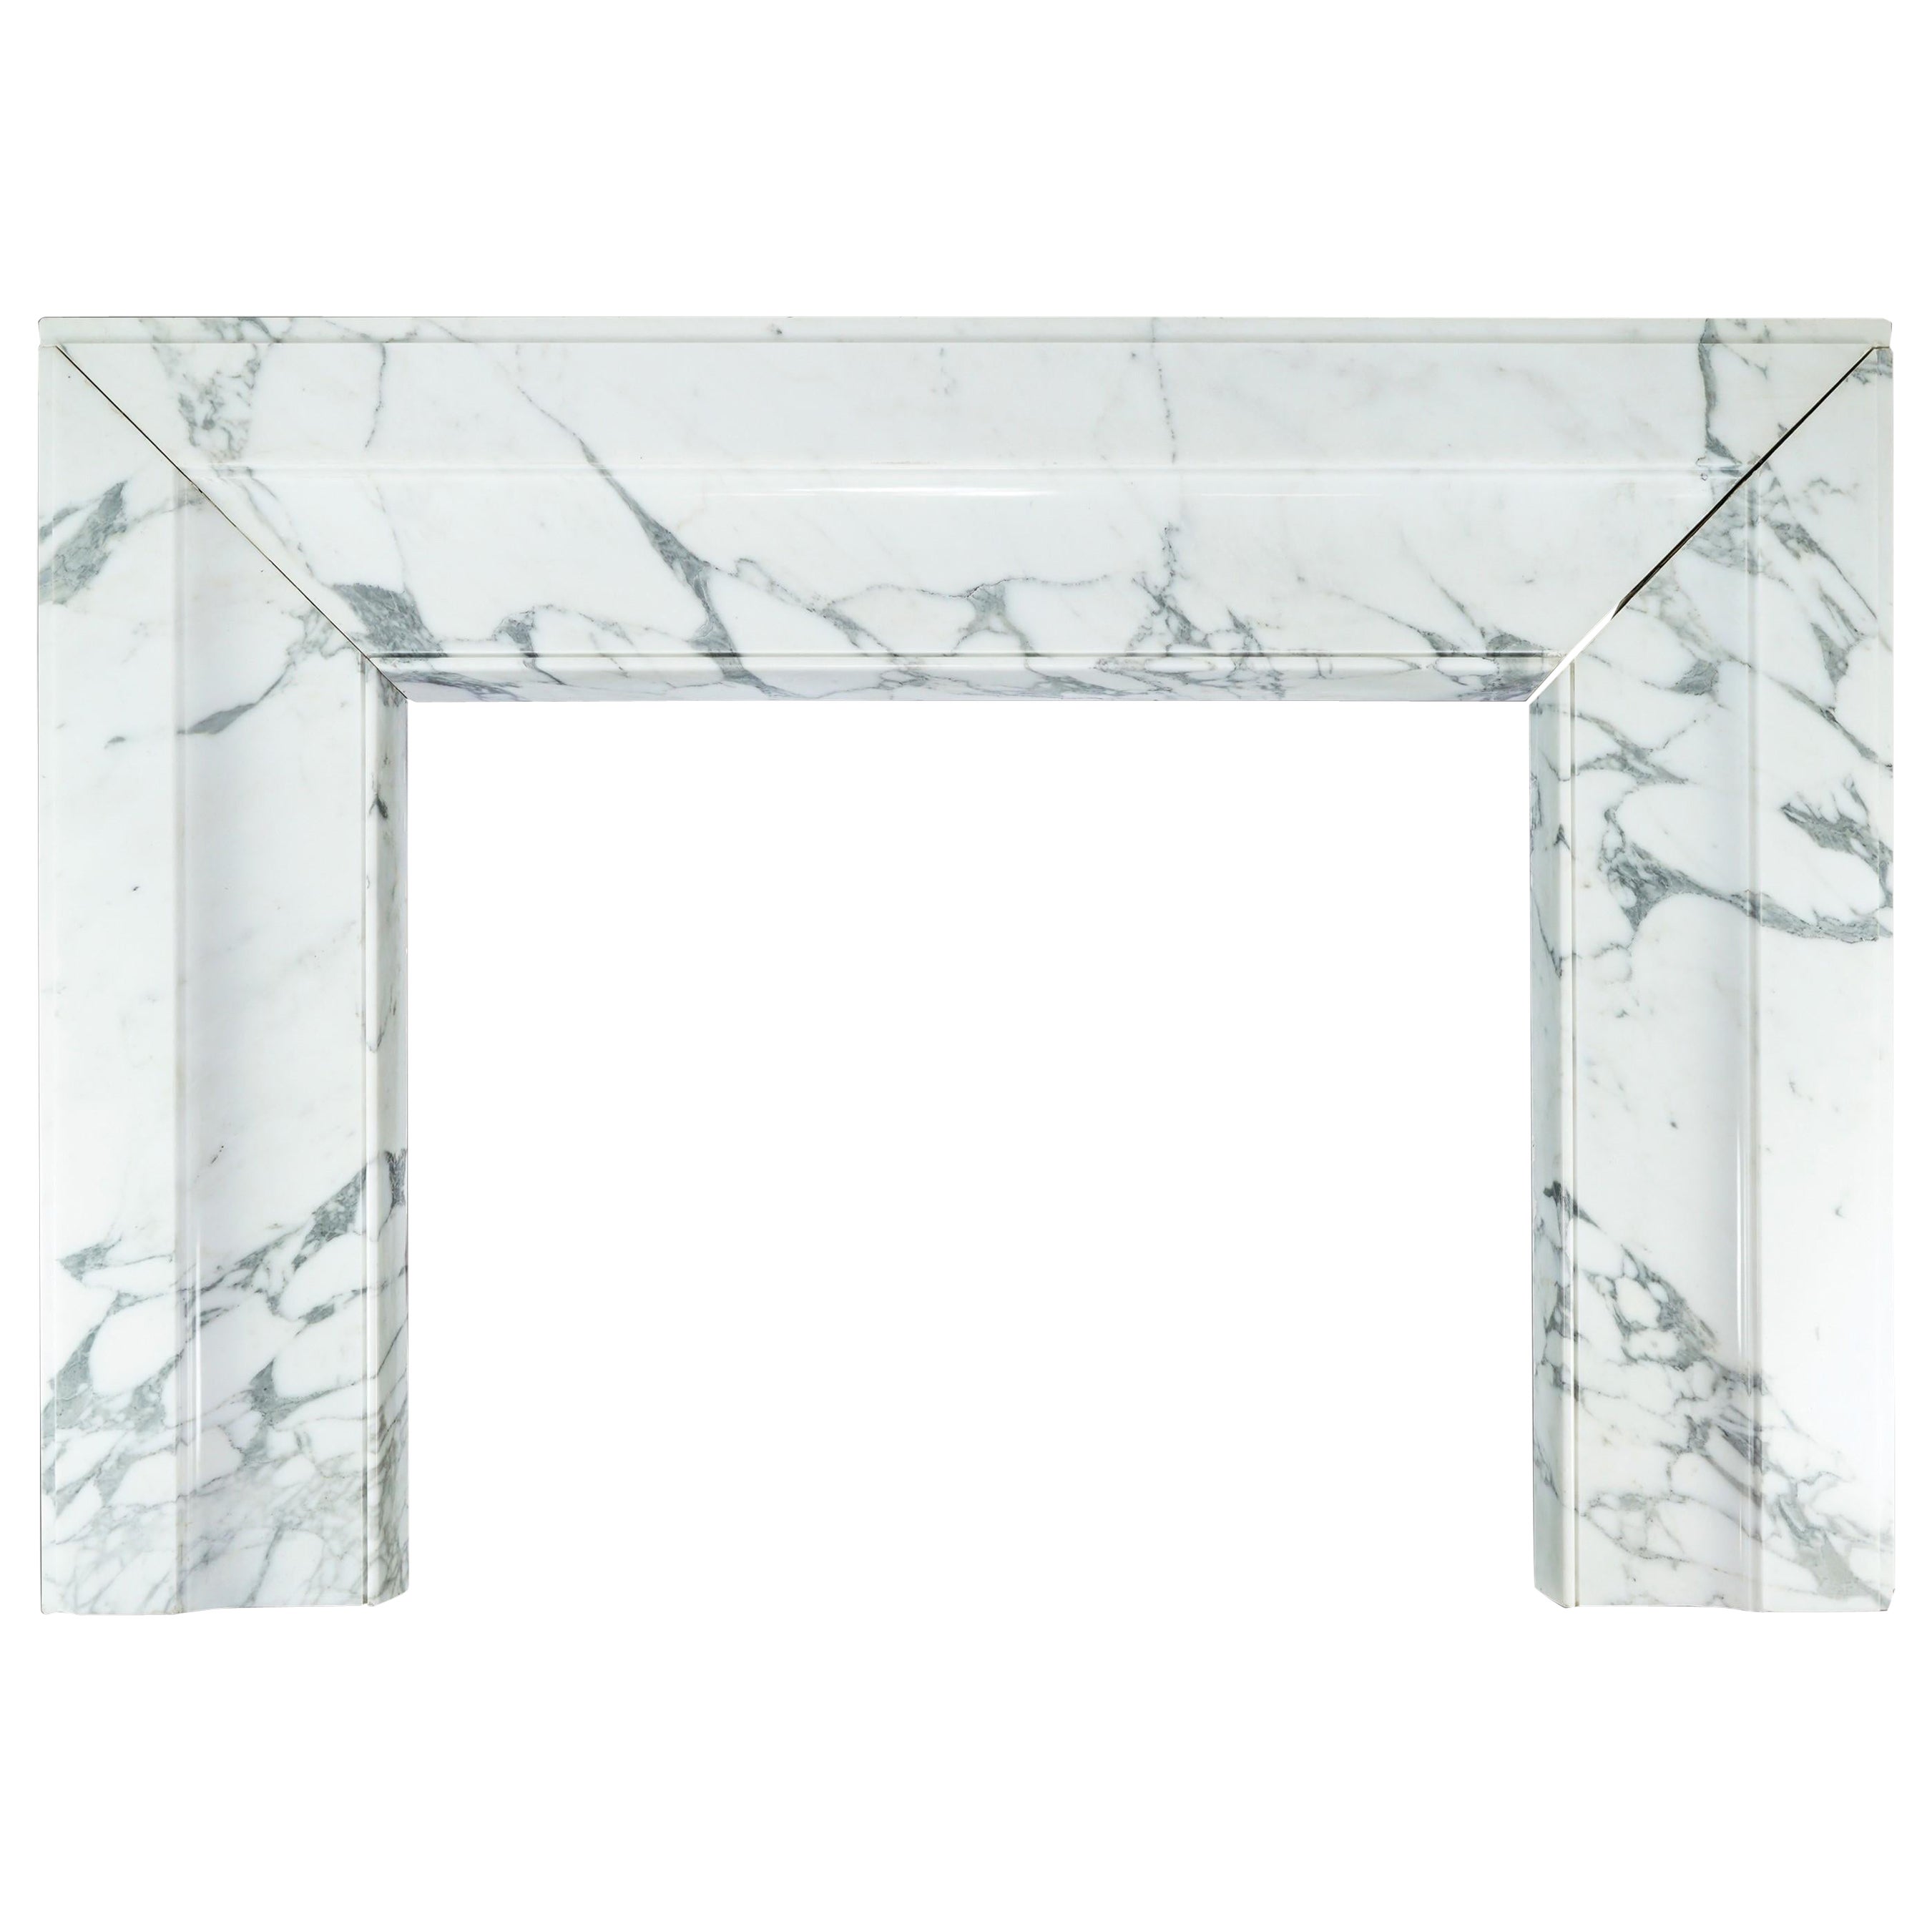 Carved Bolection Style White & Grey Veined Marble Mantel